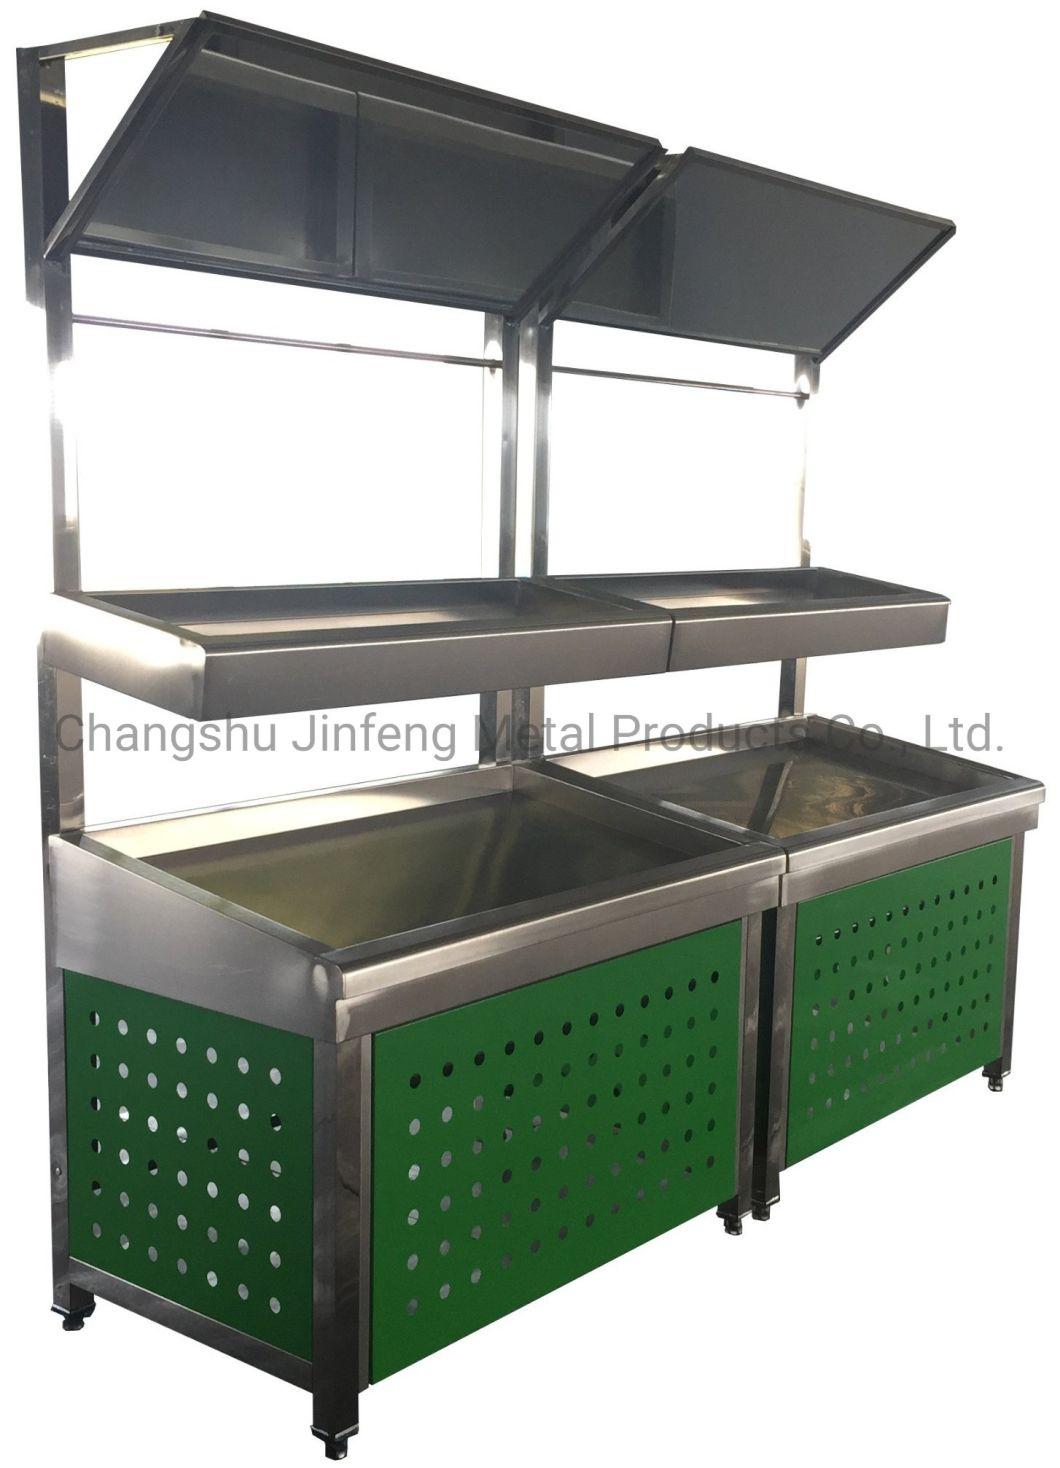 Customized Supermarket Double Layers Display Stand Shelf for Fruit and Vegetable